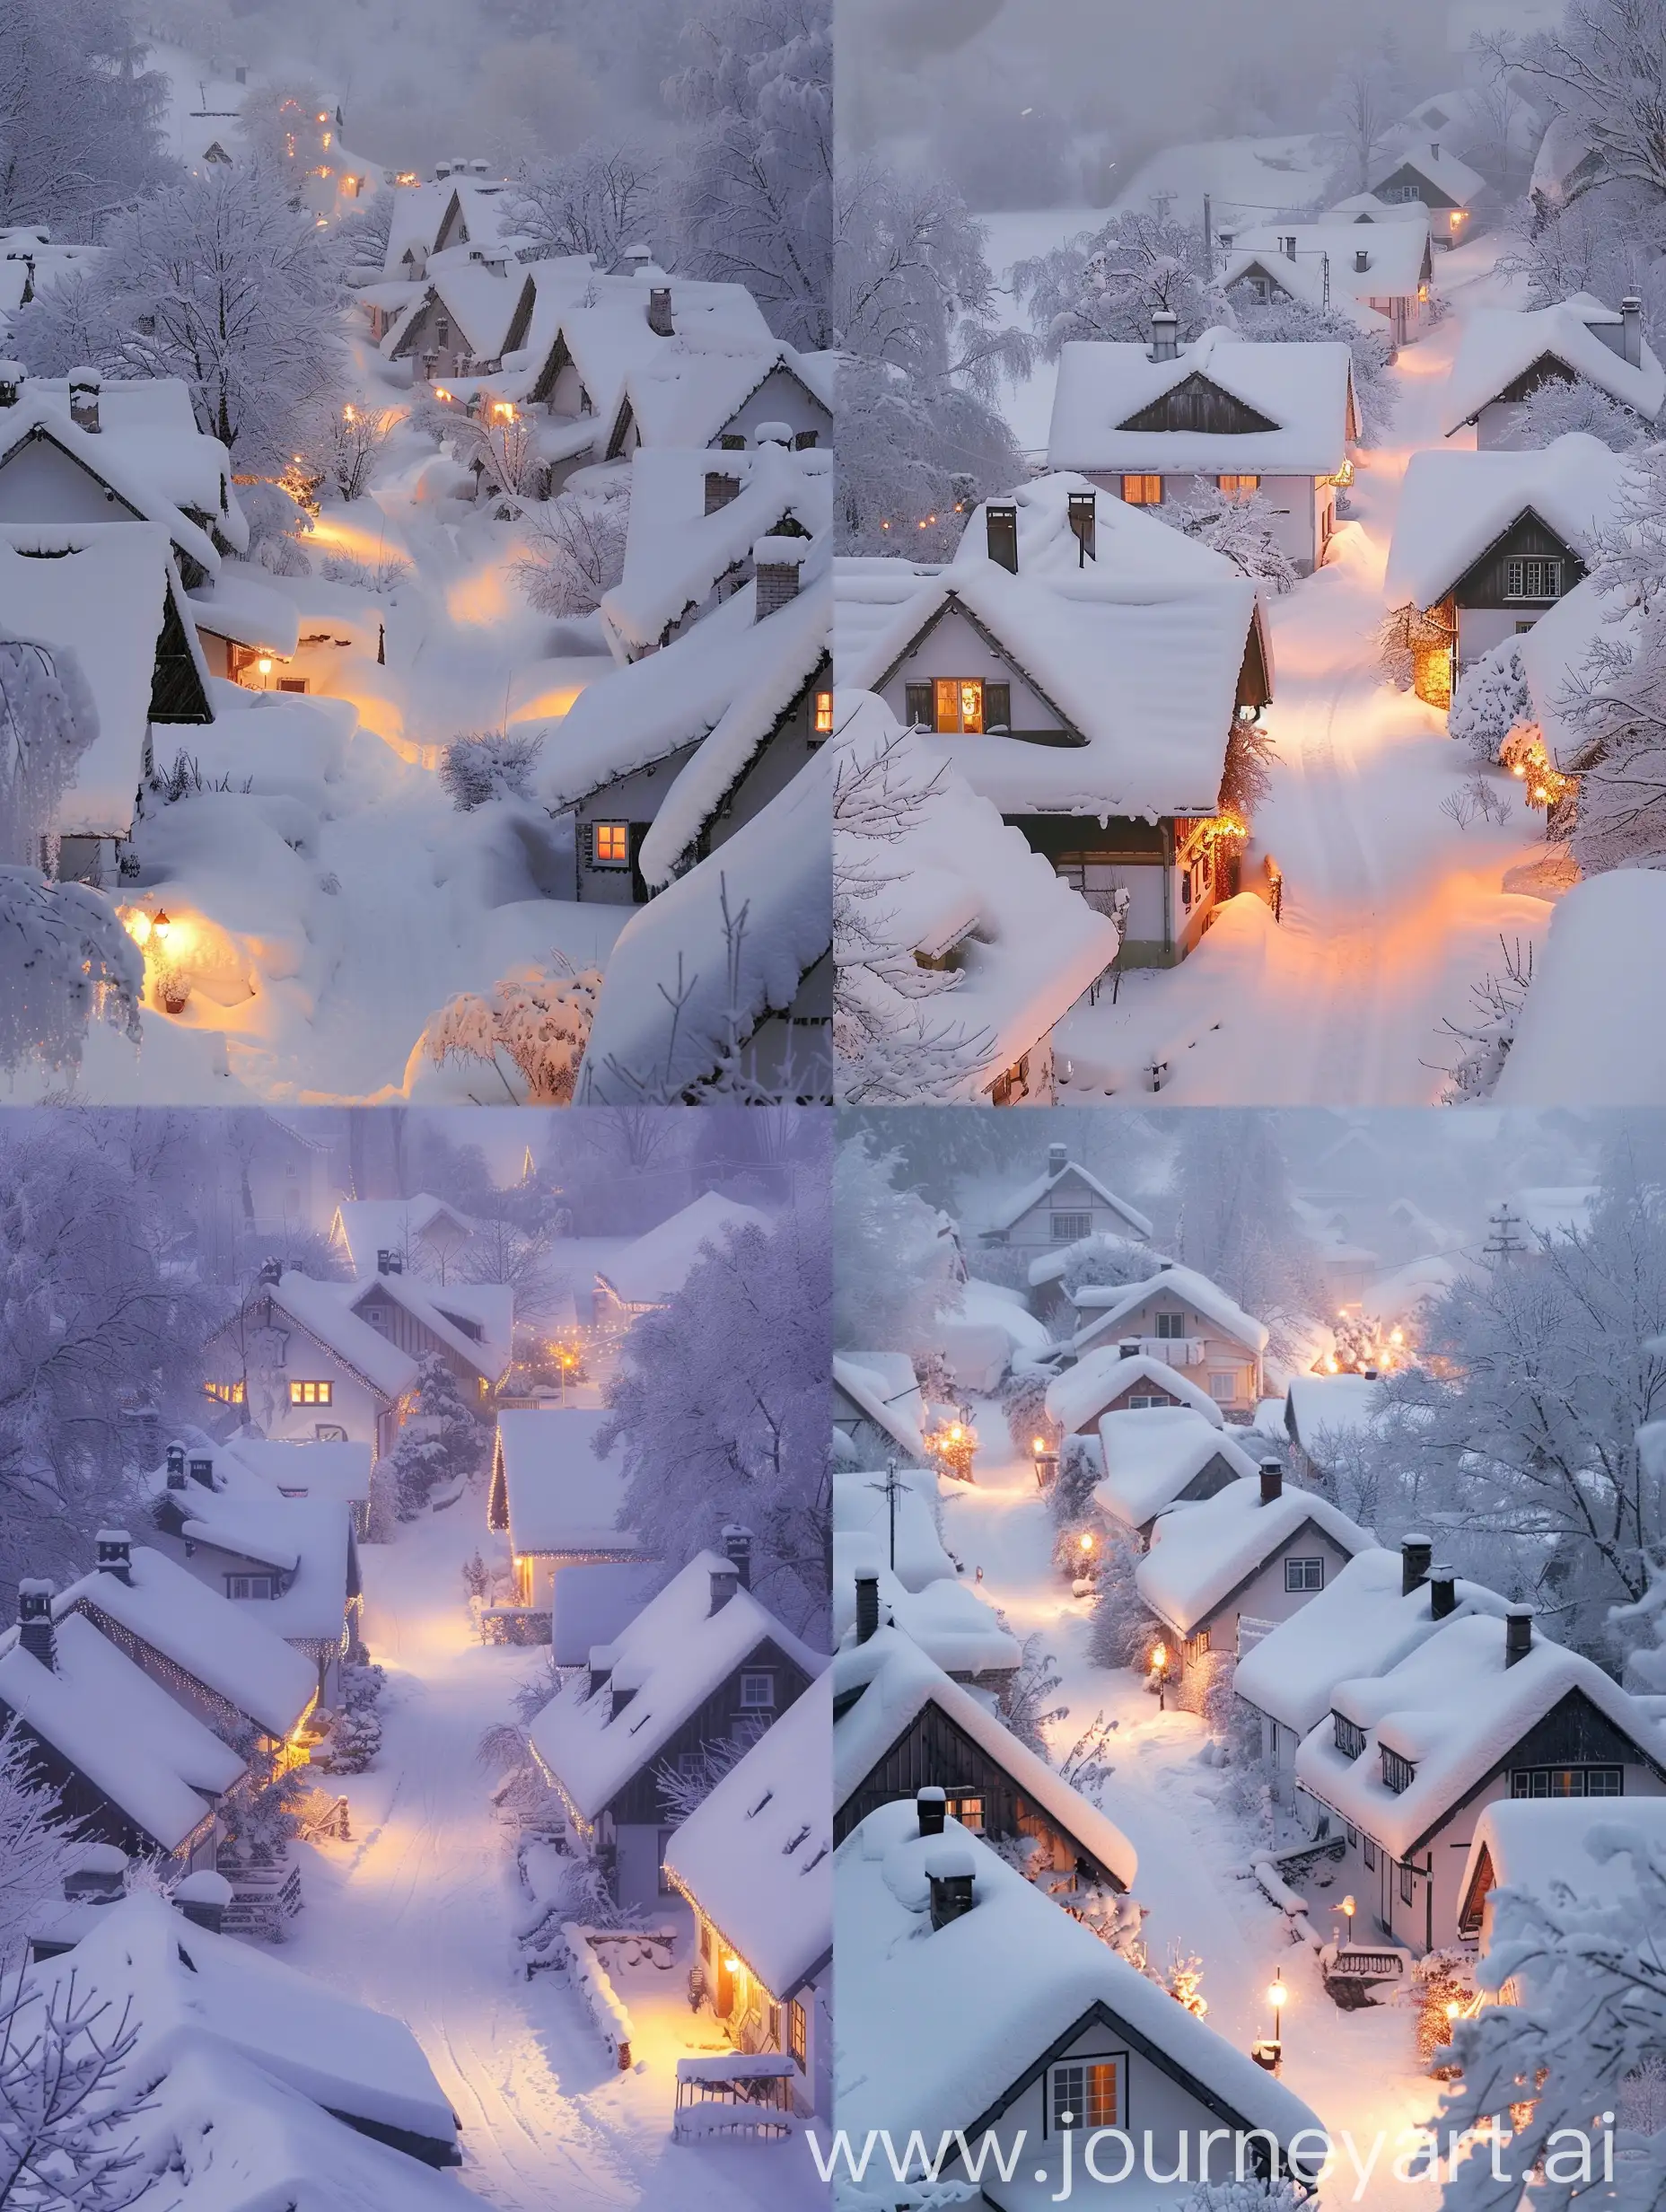  {"prompt":"A picturesque winter scene just after a snowfall has ceased. The setting is a quaint village with traditional houses covered in fresh snow, their roofs bearing the weight of the white blanket. The streets are untouched by footsteps, revealing the pristine nature of the new snow. Warm lights emanate from the windows of the homes, casting a golden glow that reflects off the snow, creating a contrast with the dark, tranquil night. A soft haze lingers, suggesting the recent end of the snowfall. The trees around the village are frosted with snow, standing as silent witnesses to this serene moment.","size":"1024x1024"}